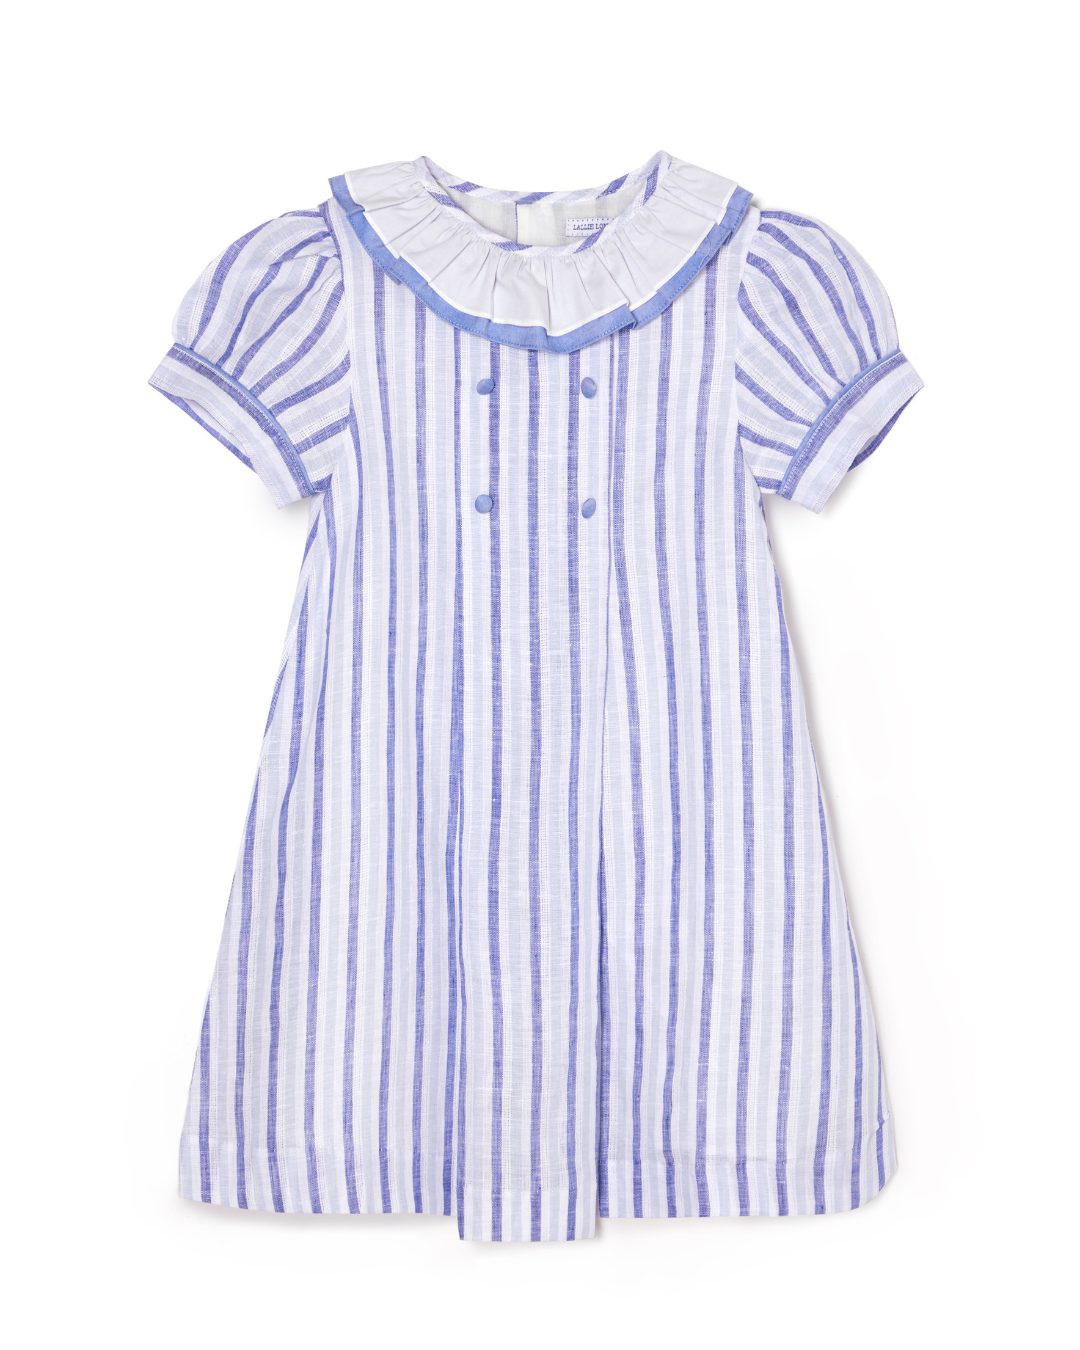 Verity Dress | Double Frill Collar Dress in Blue Stripes